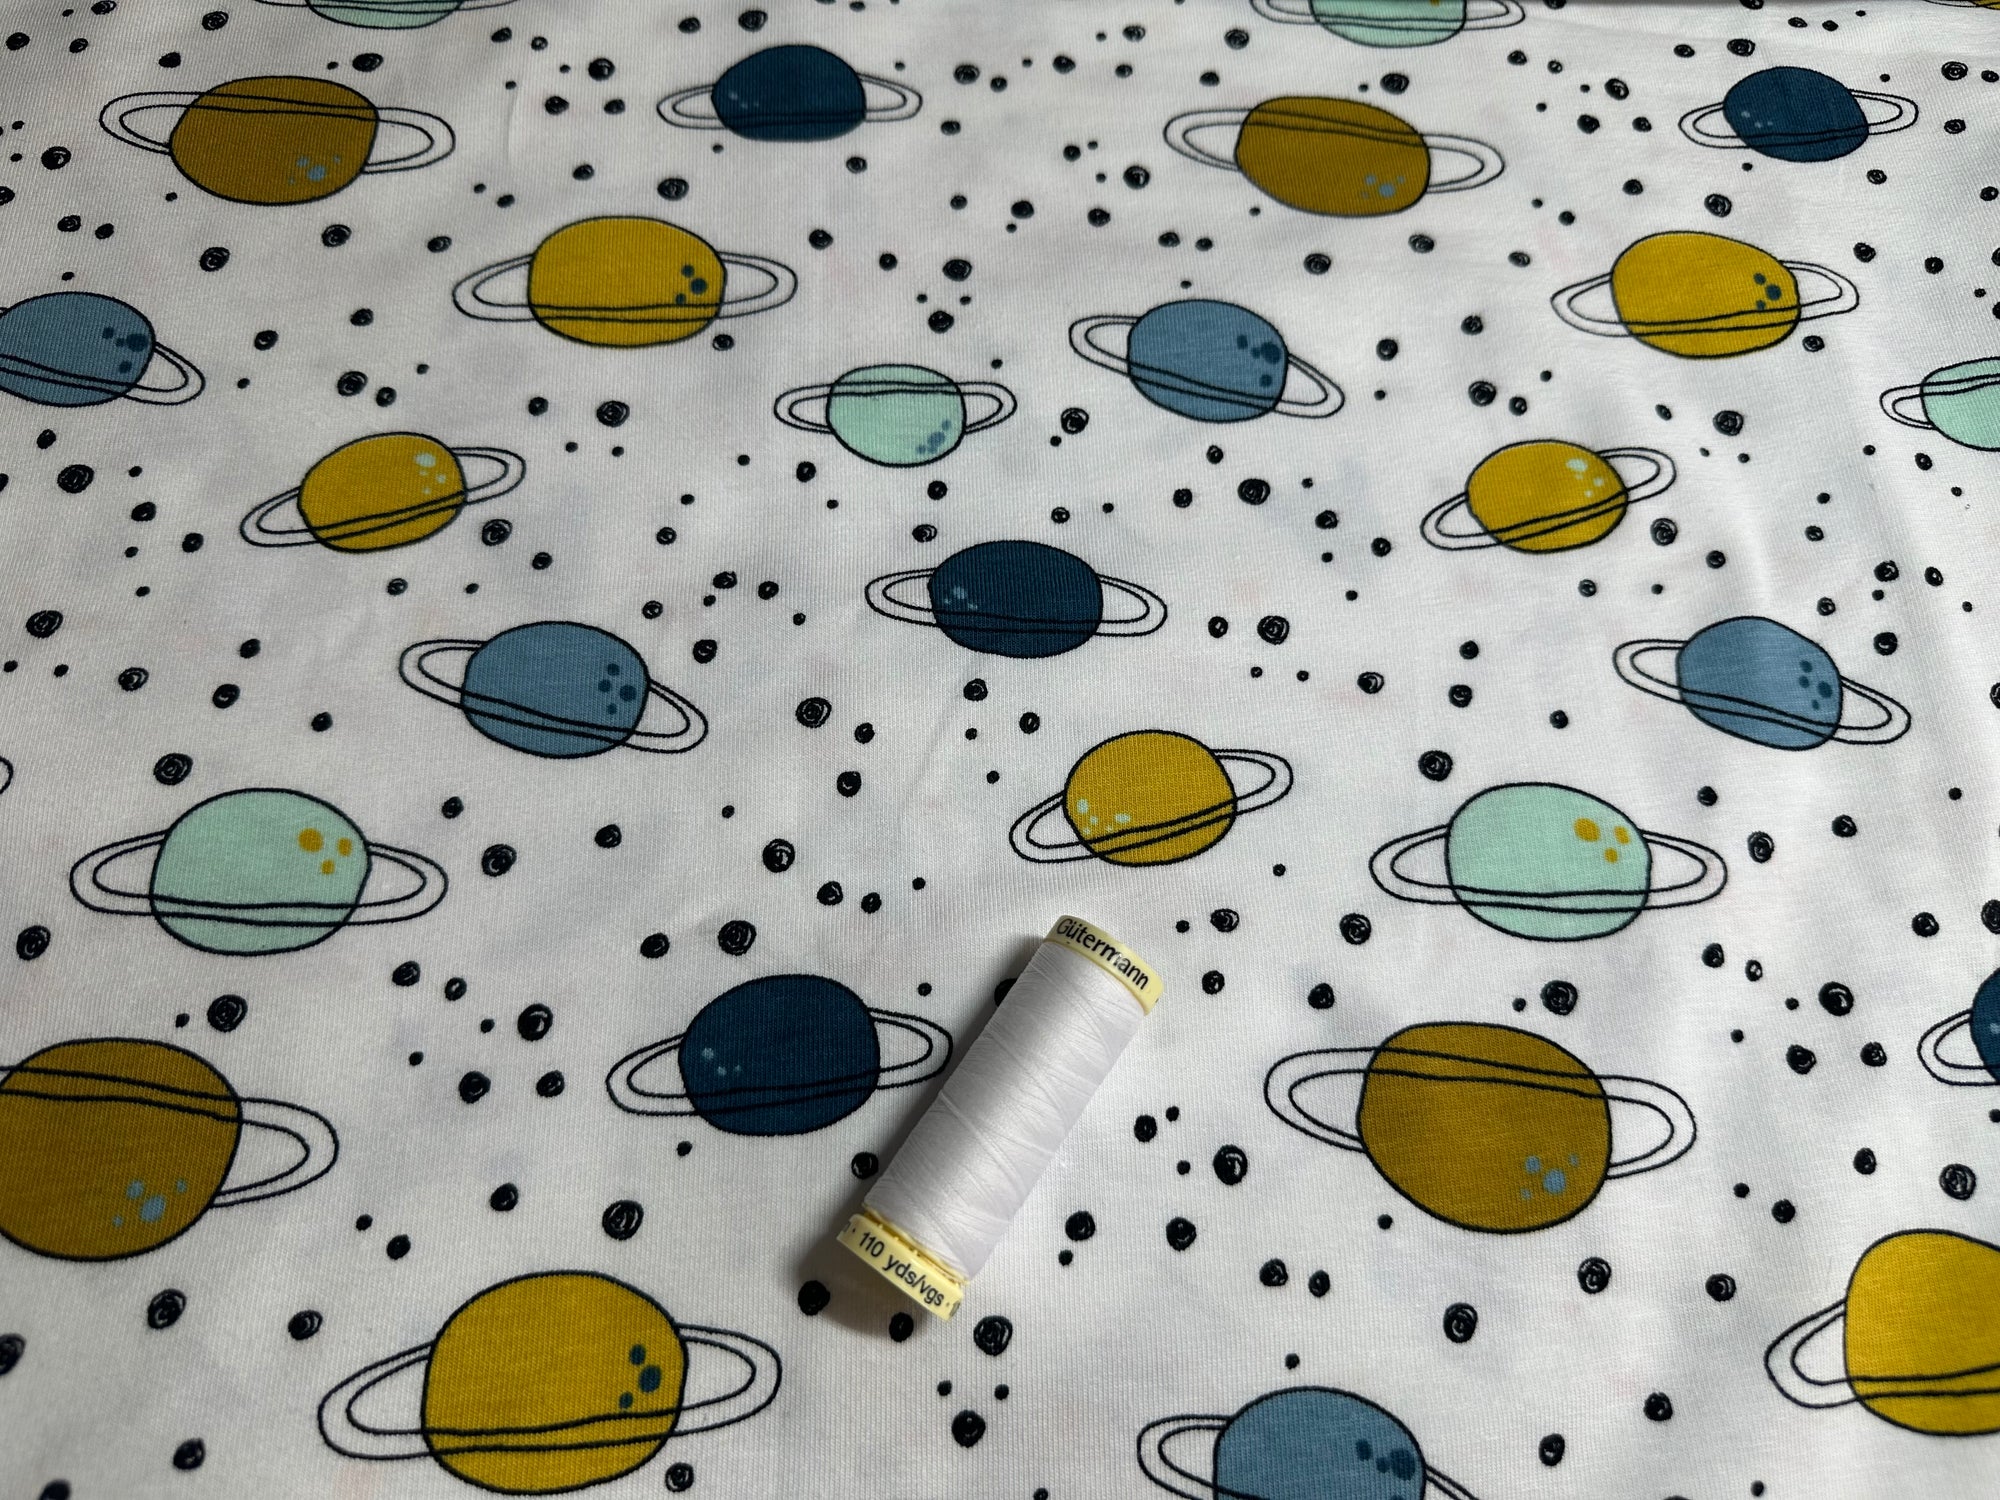 Remnant Planets & Spots Design on White Printed Jersey